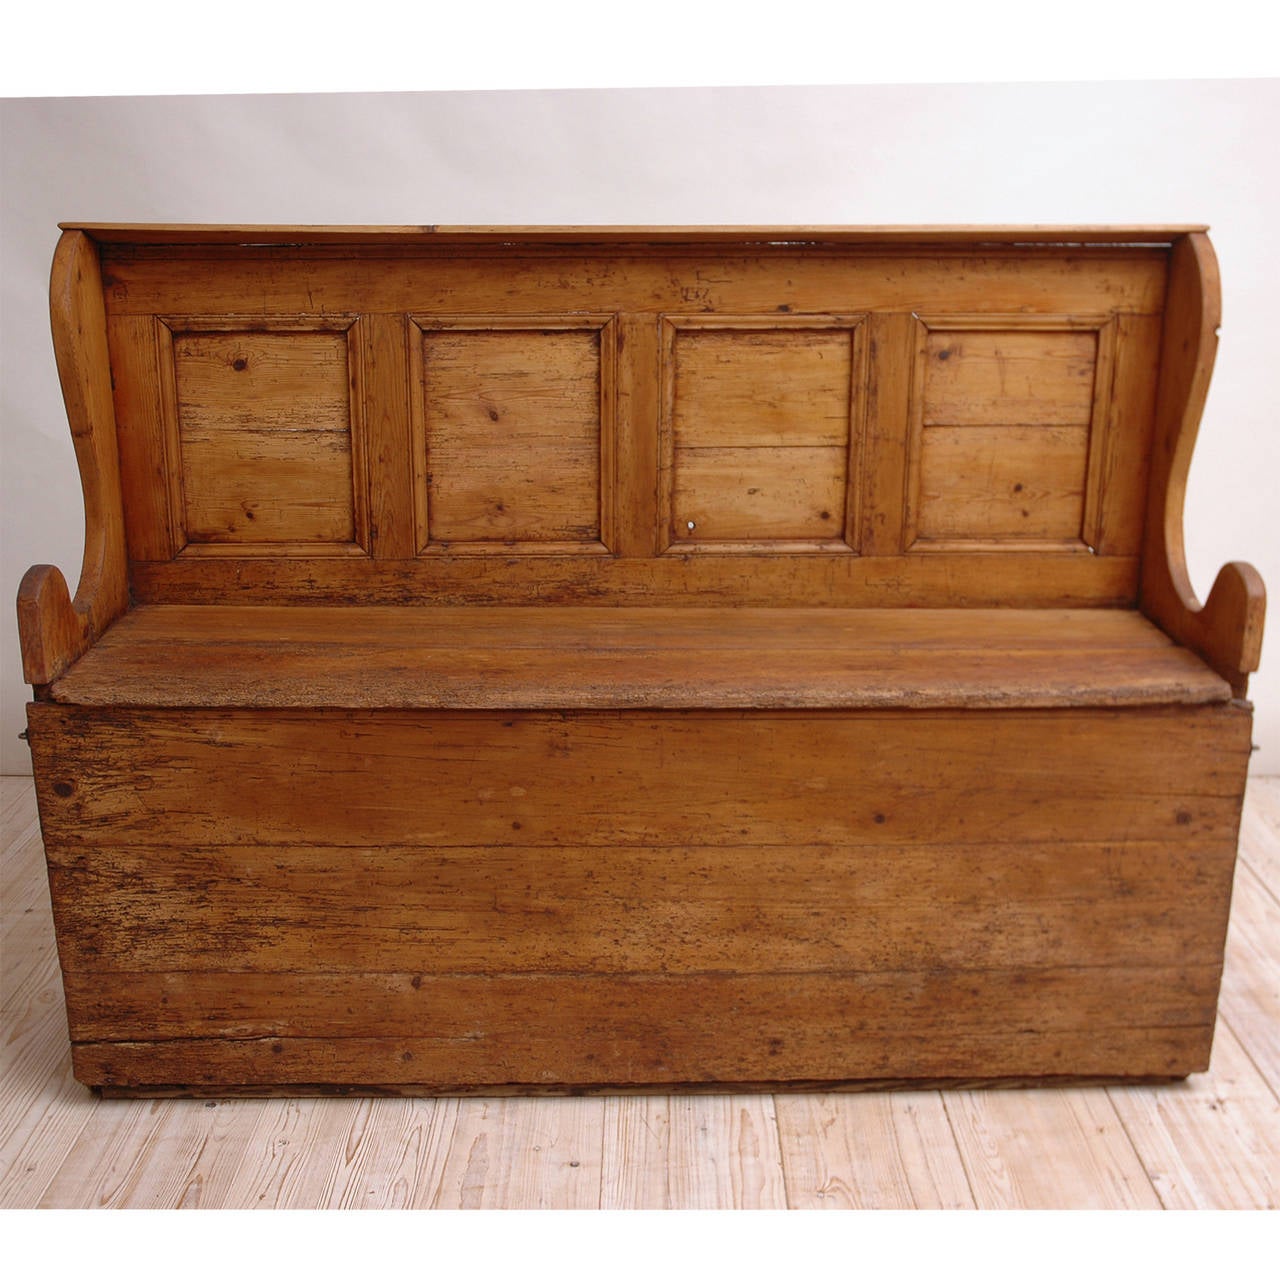 A charming pine bench with paneled back that opens to house a feather mattress for a guest, England, circa 1800. Lovely for use in a mud room, children's playroom or on a patio. Finished with tung oil which will hold up outdoors under a covered